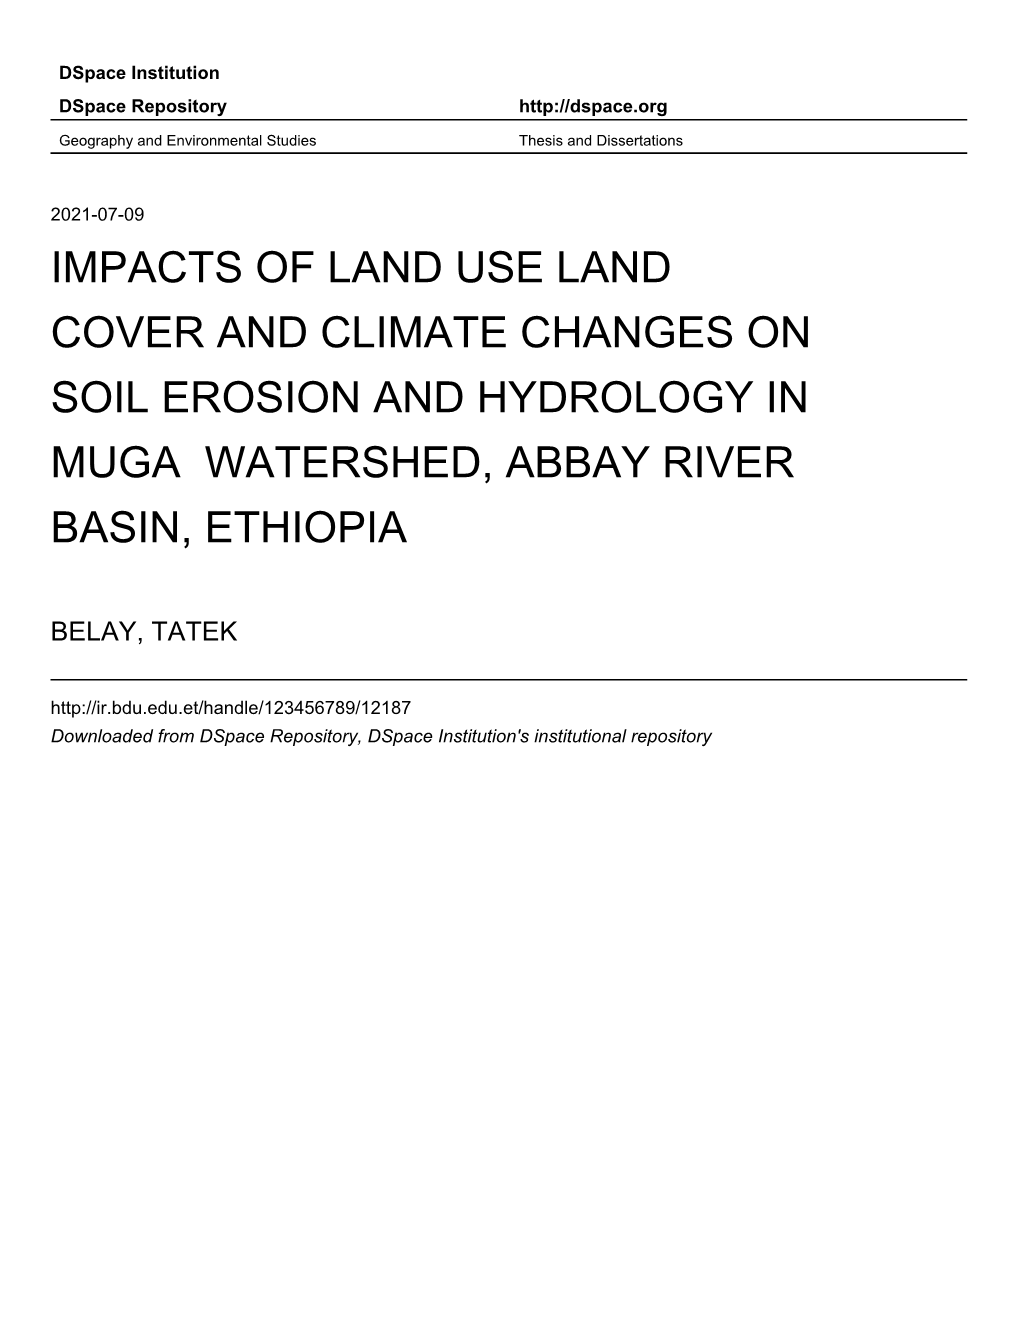 Impacts of Land Use Land Cover and Climate Changes on Soil Erosion and Hydrology in Muga Watershed, Abbay River Basin, Ethiopia